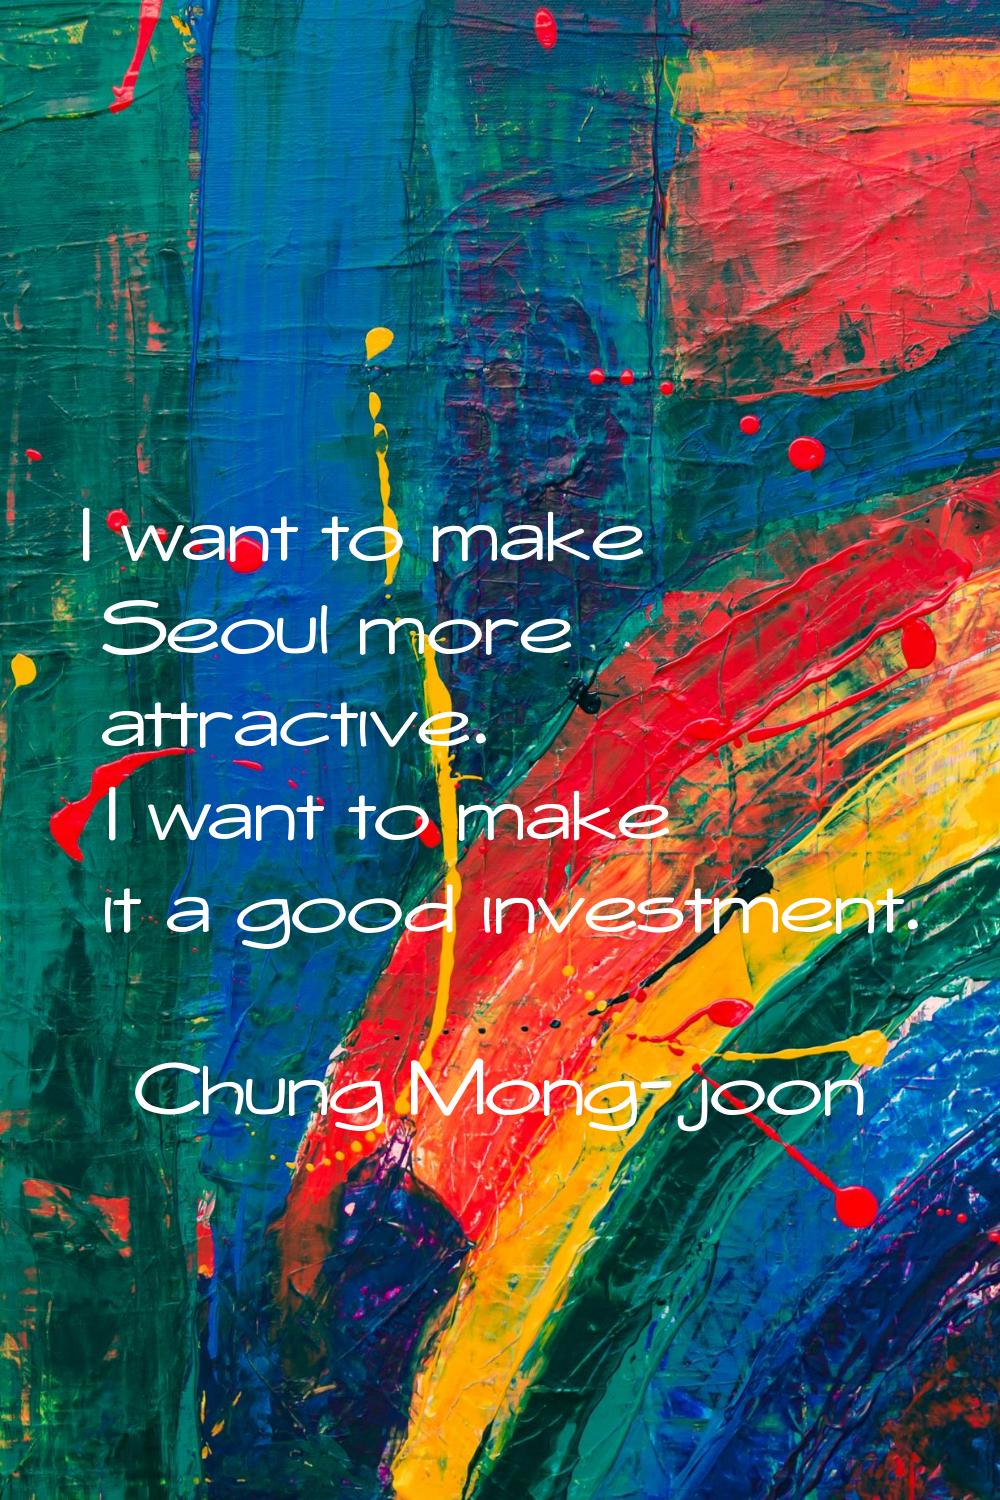 I want to make Seoul more attractive. I want to make it a good investment.